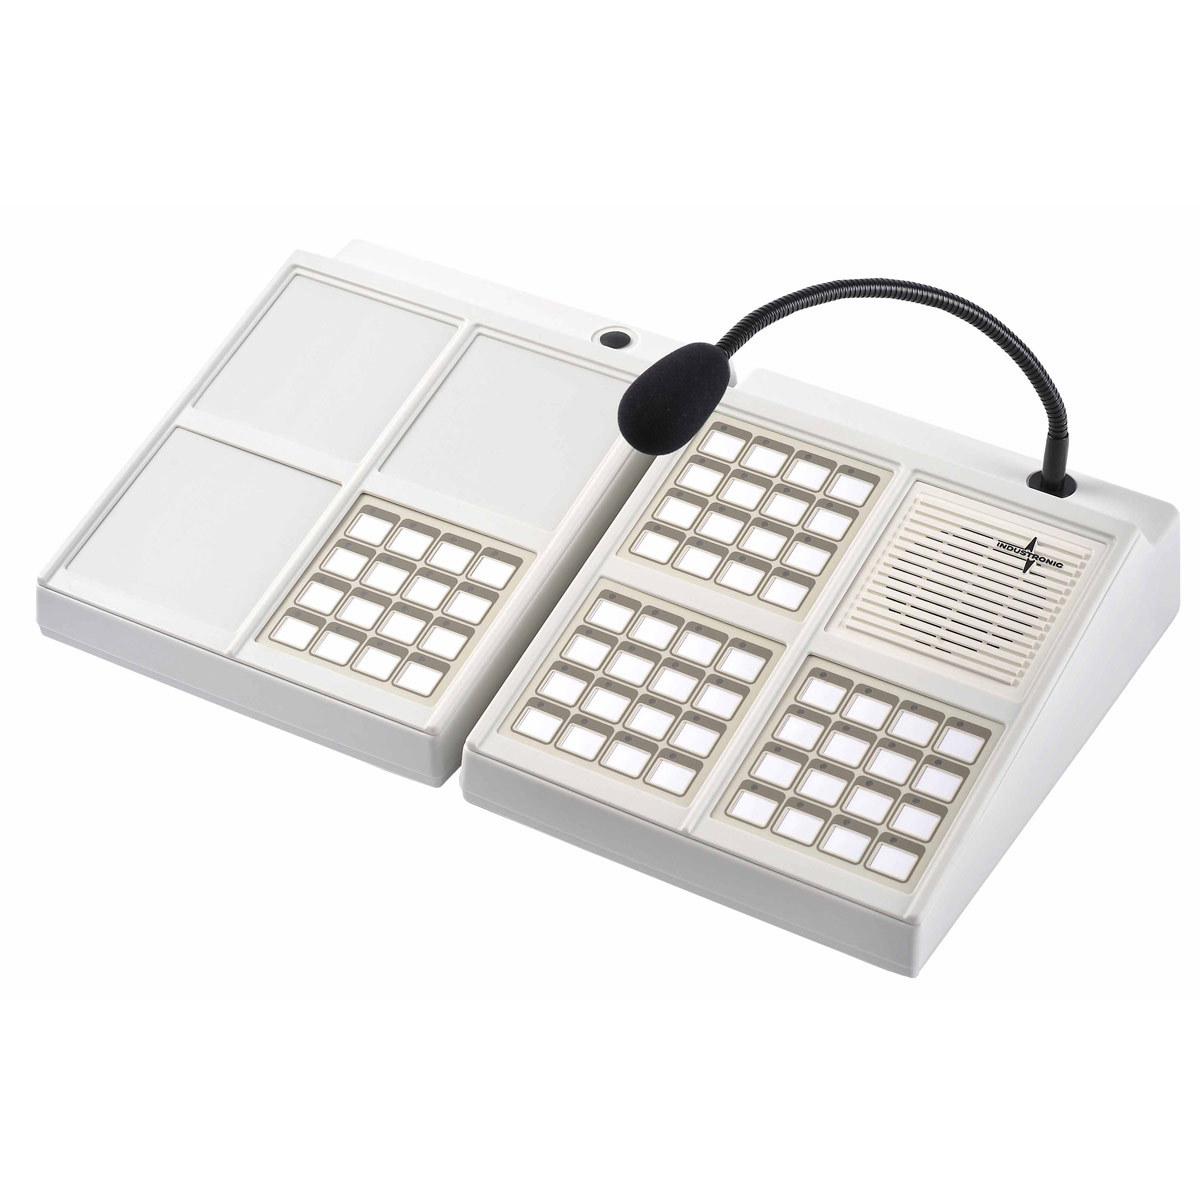 Digital Intercom Station with gooseneck microphone, membrane keypads with 16 keys or keypad with 10 momentary switches